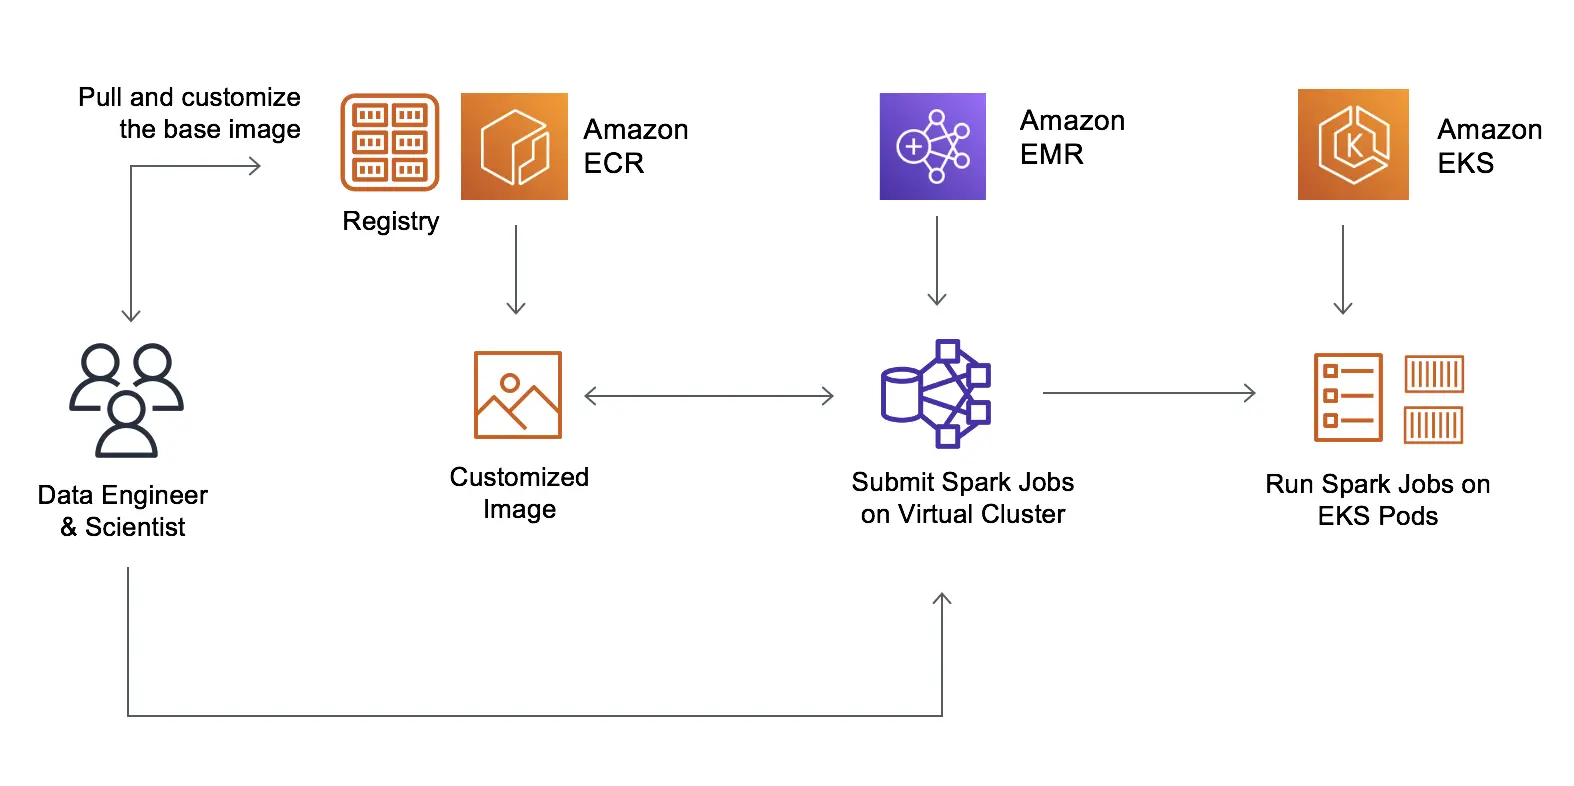 Project: Real-Time Data Analysis with ACID-Compliant Transactions in Amazon Athena